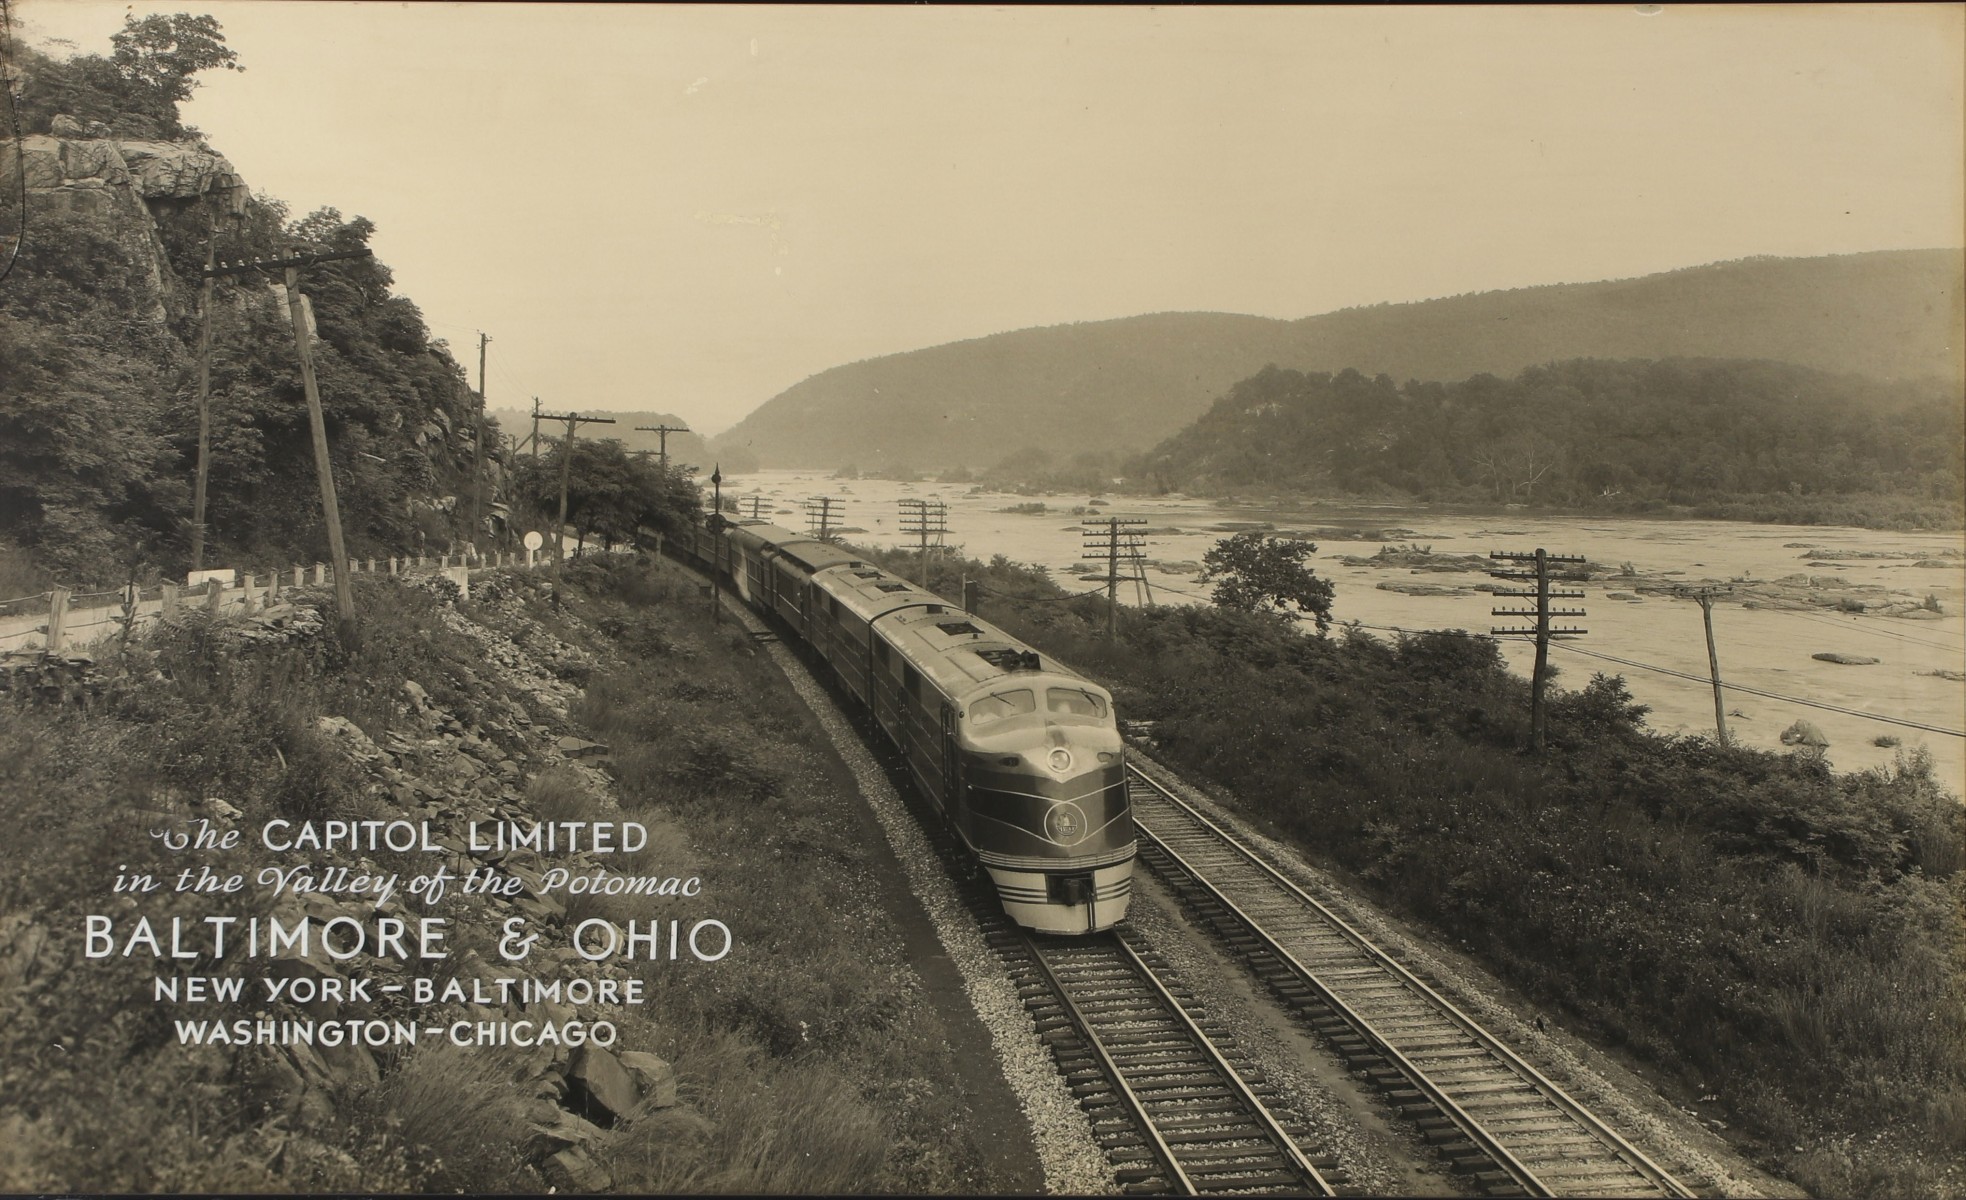 PHOTOGRAVURE OF 'THE CAPITOL LIMITED' ALONG THE POTOMAC